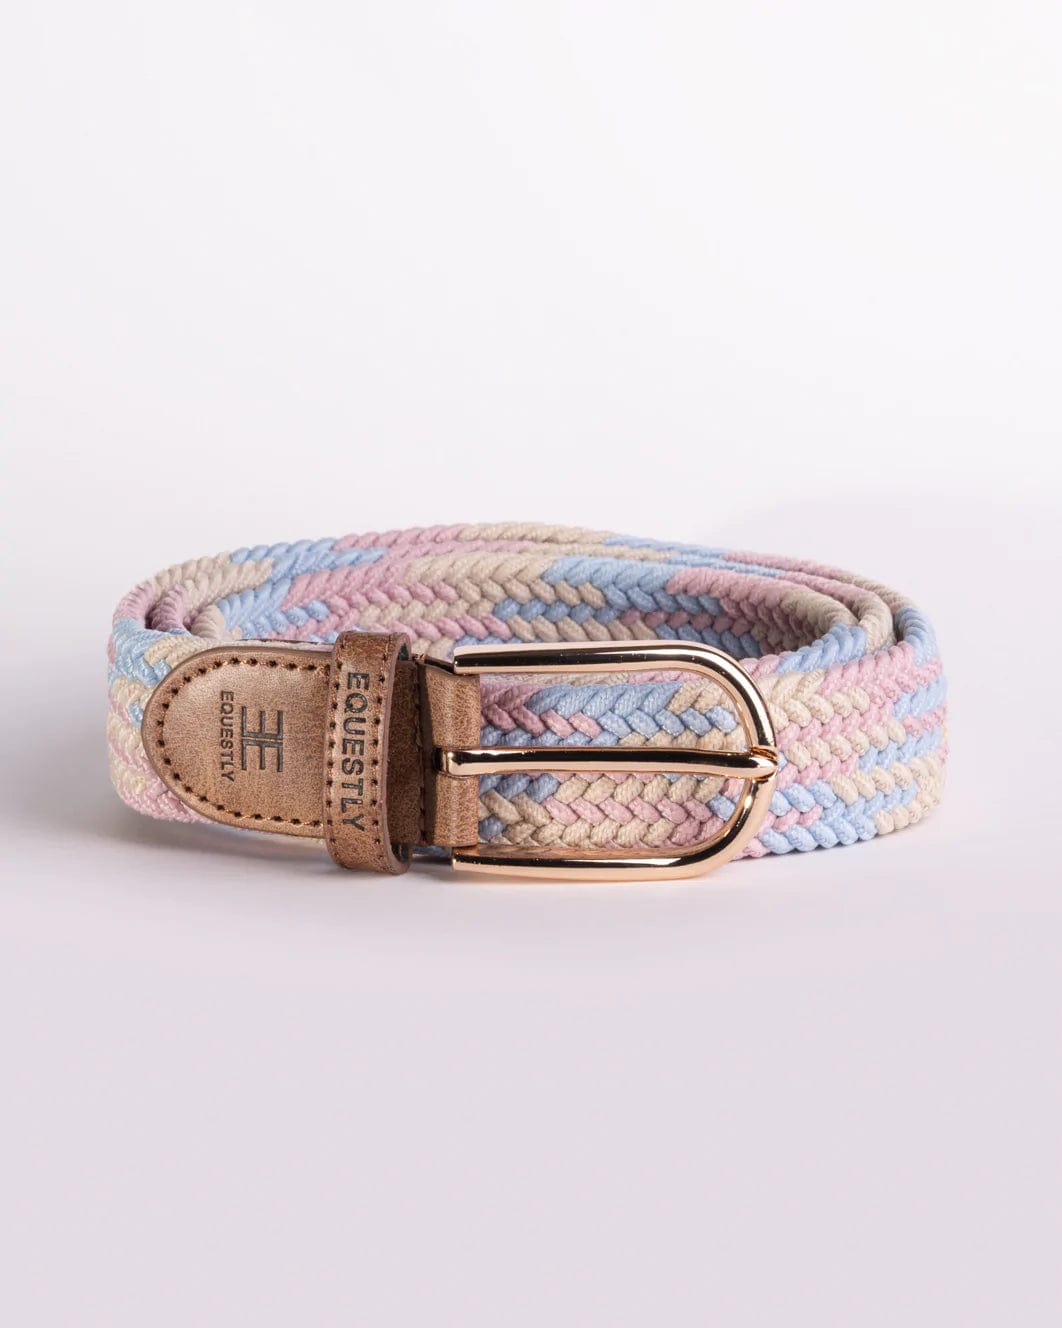 EQODE By Equiline Belts Equestly Braided Belt equestrian team apparel online tack store mobile tack store custom farm apparel custom show stable clothing equestrian lifestyle horse show clothing riding clothes horses equestrian tack store